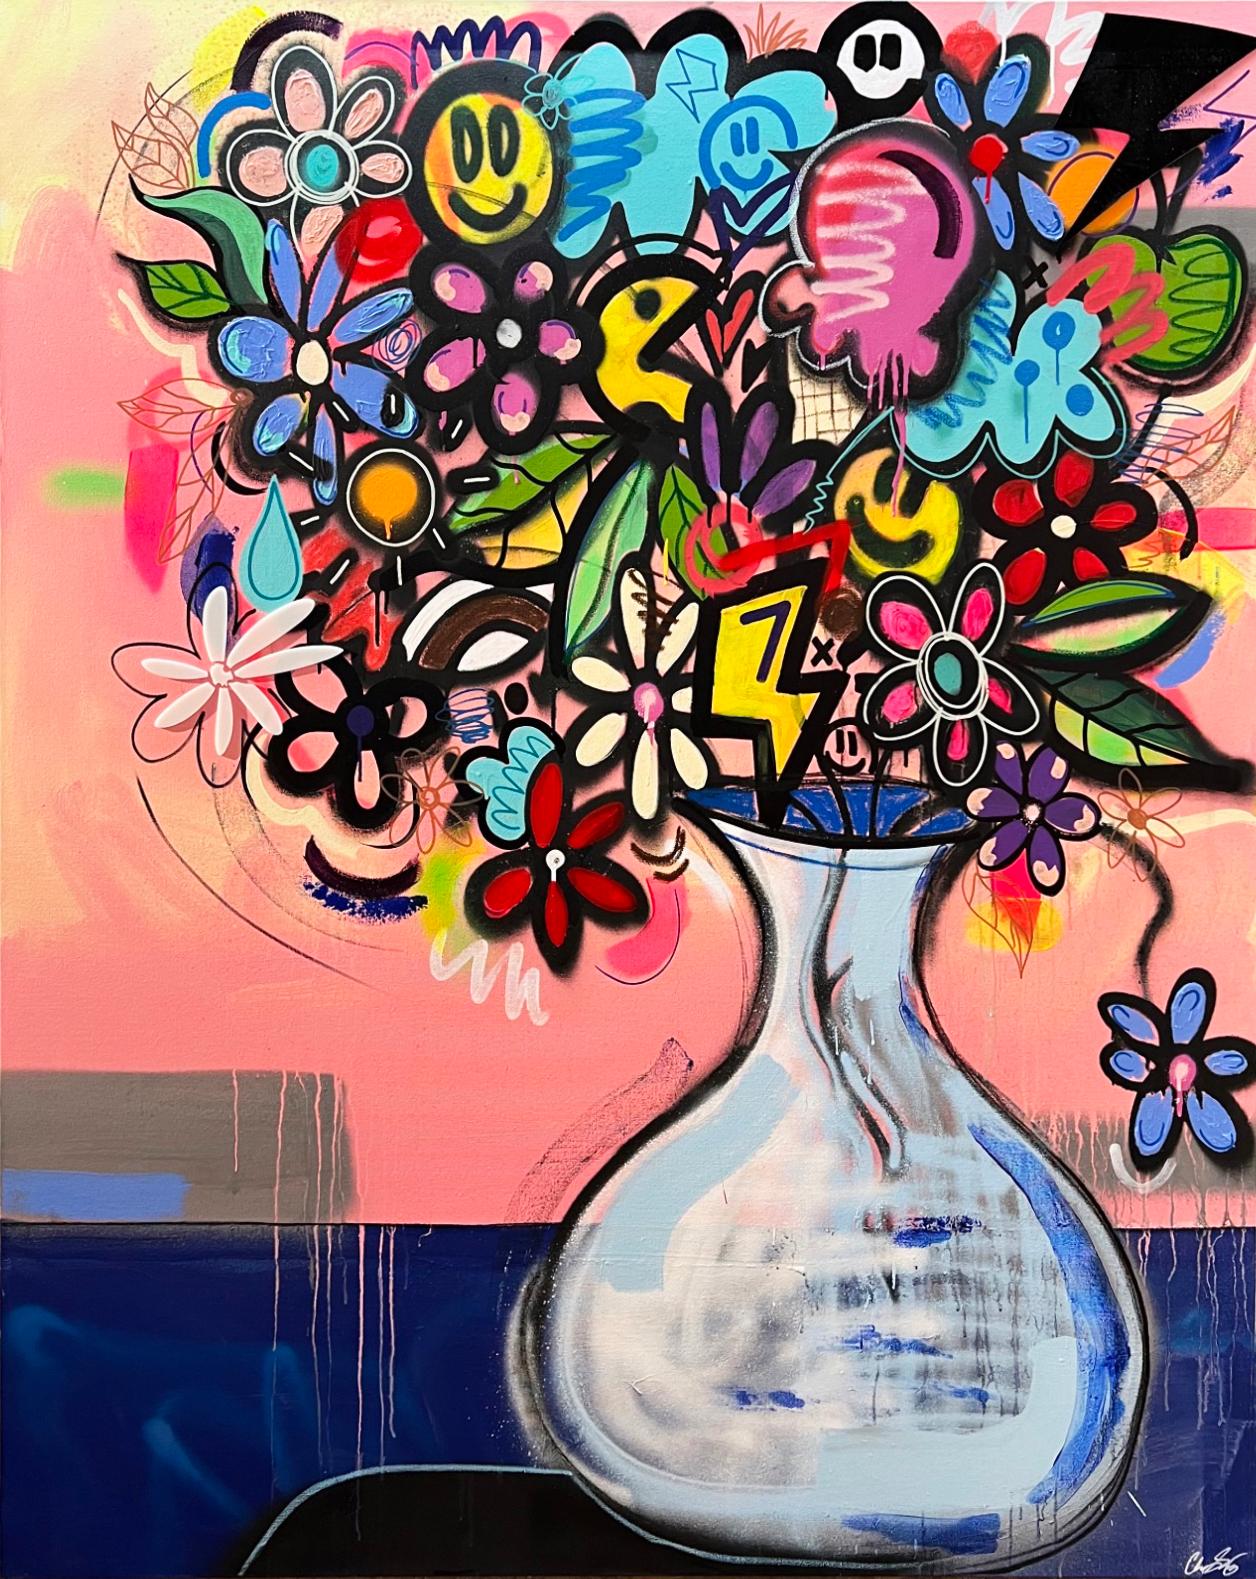 Bouquet No. 1, large graffiti floral still life, acrylic on canvas, 2022